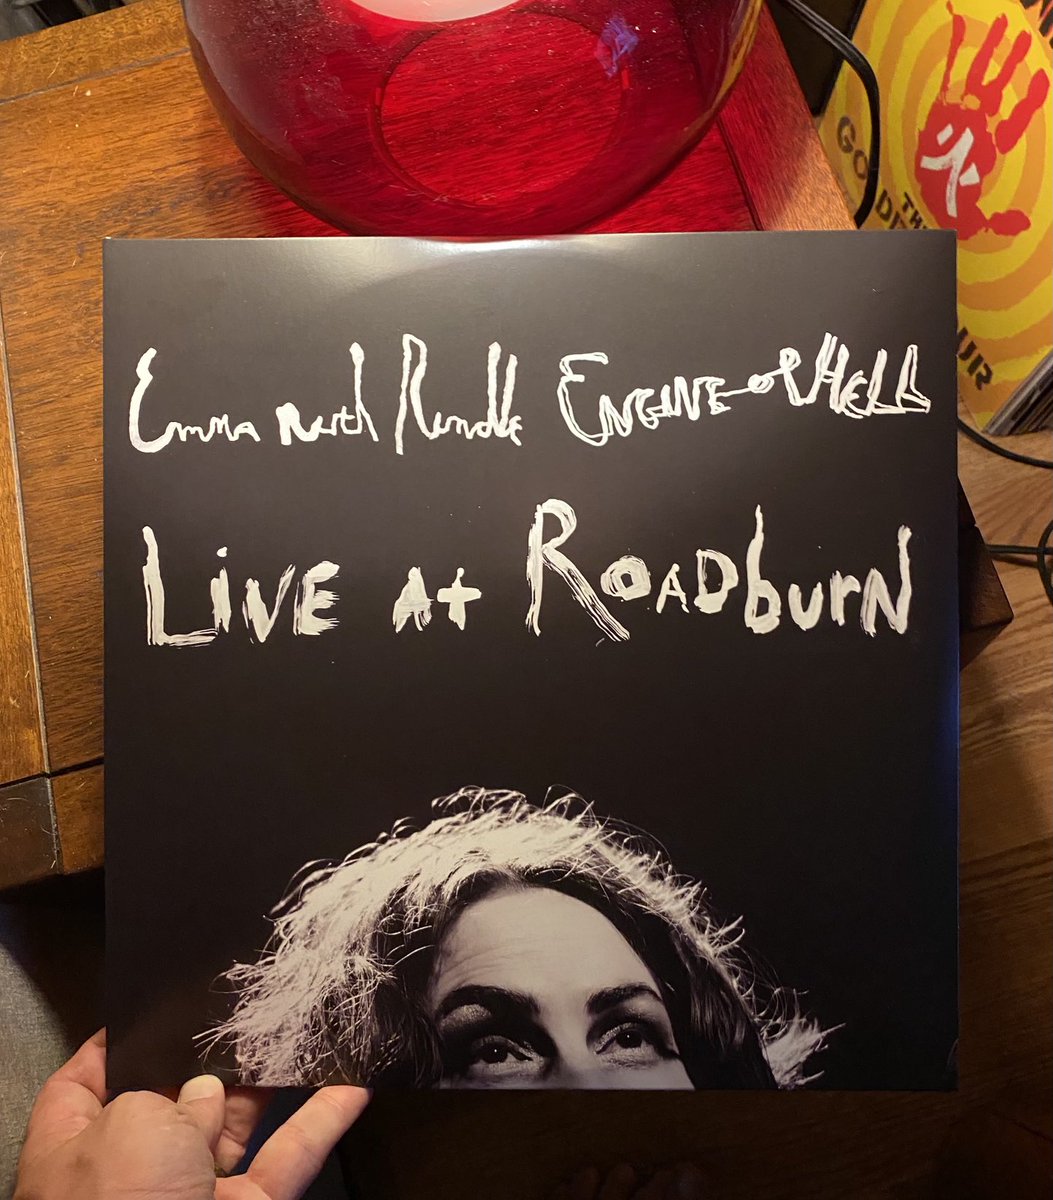 Amazing new live album from ⁦@EmmaRuthRundle⁩ who in my opinion is one of the best songwriters and musicians around, really glad we saw her Engines of Hell tour in Portland — it was haunting.